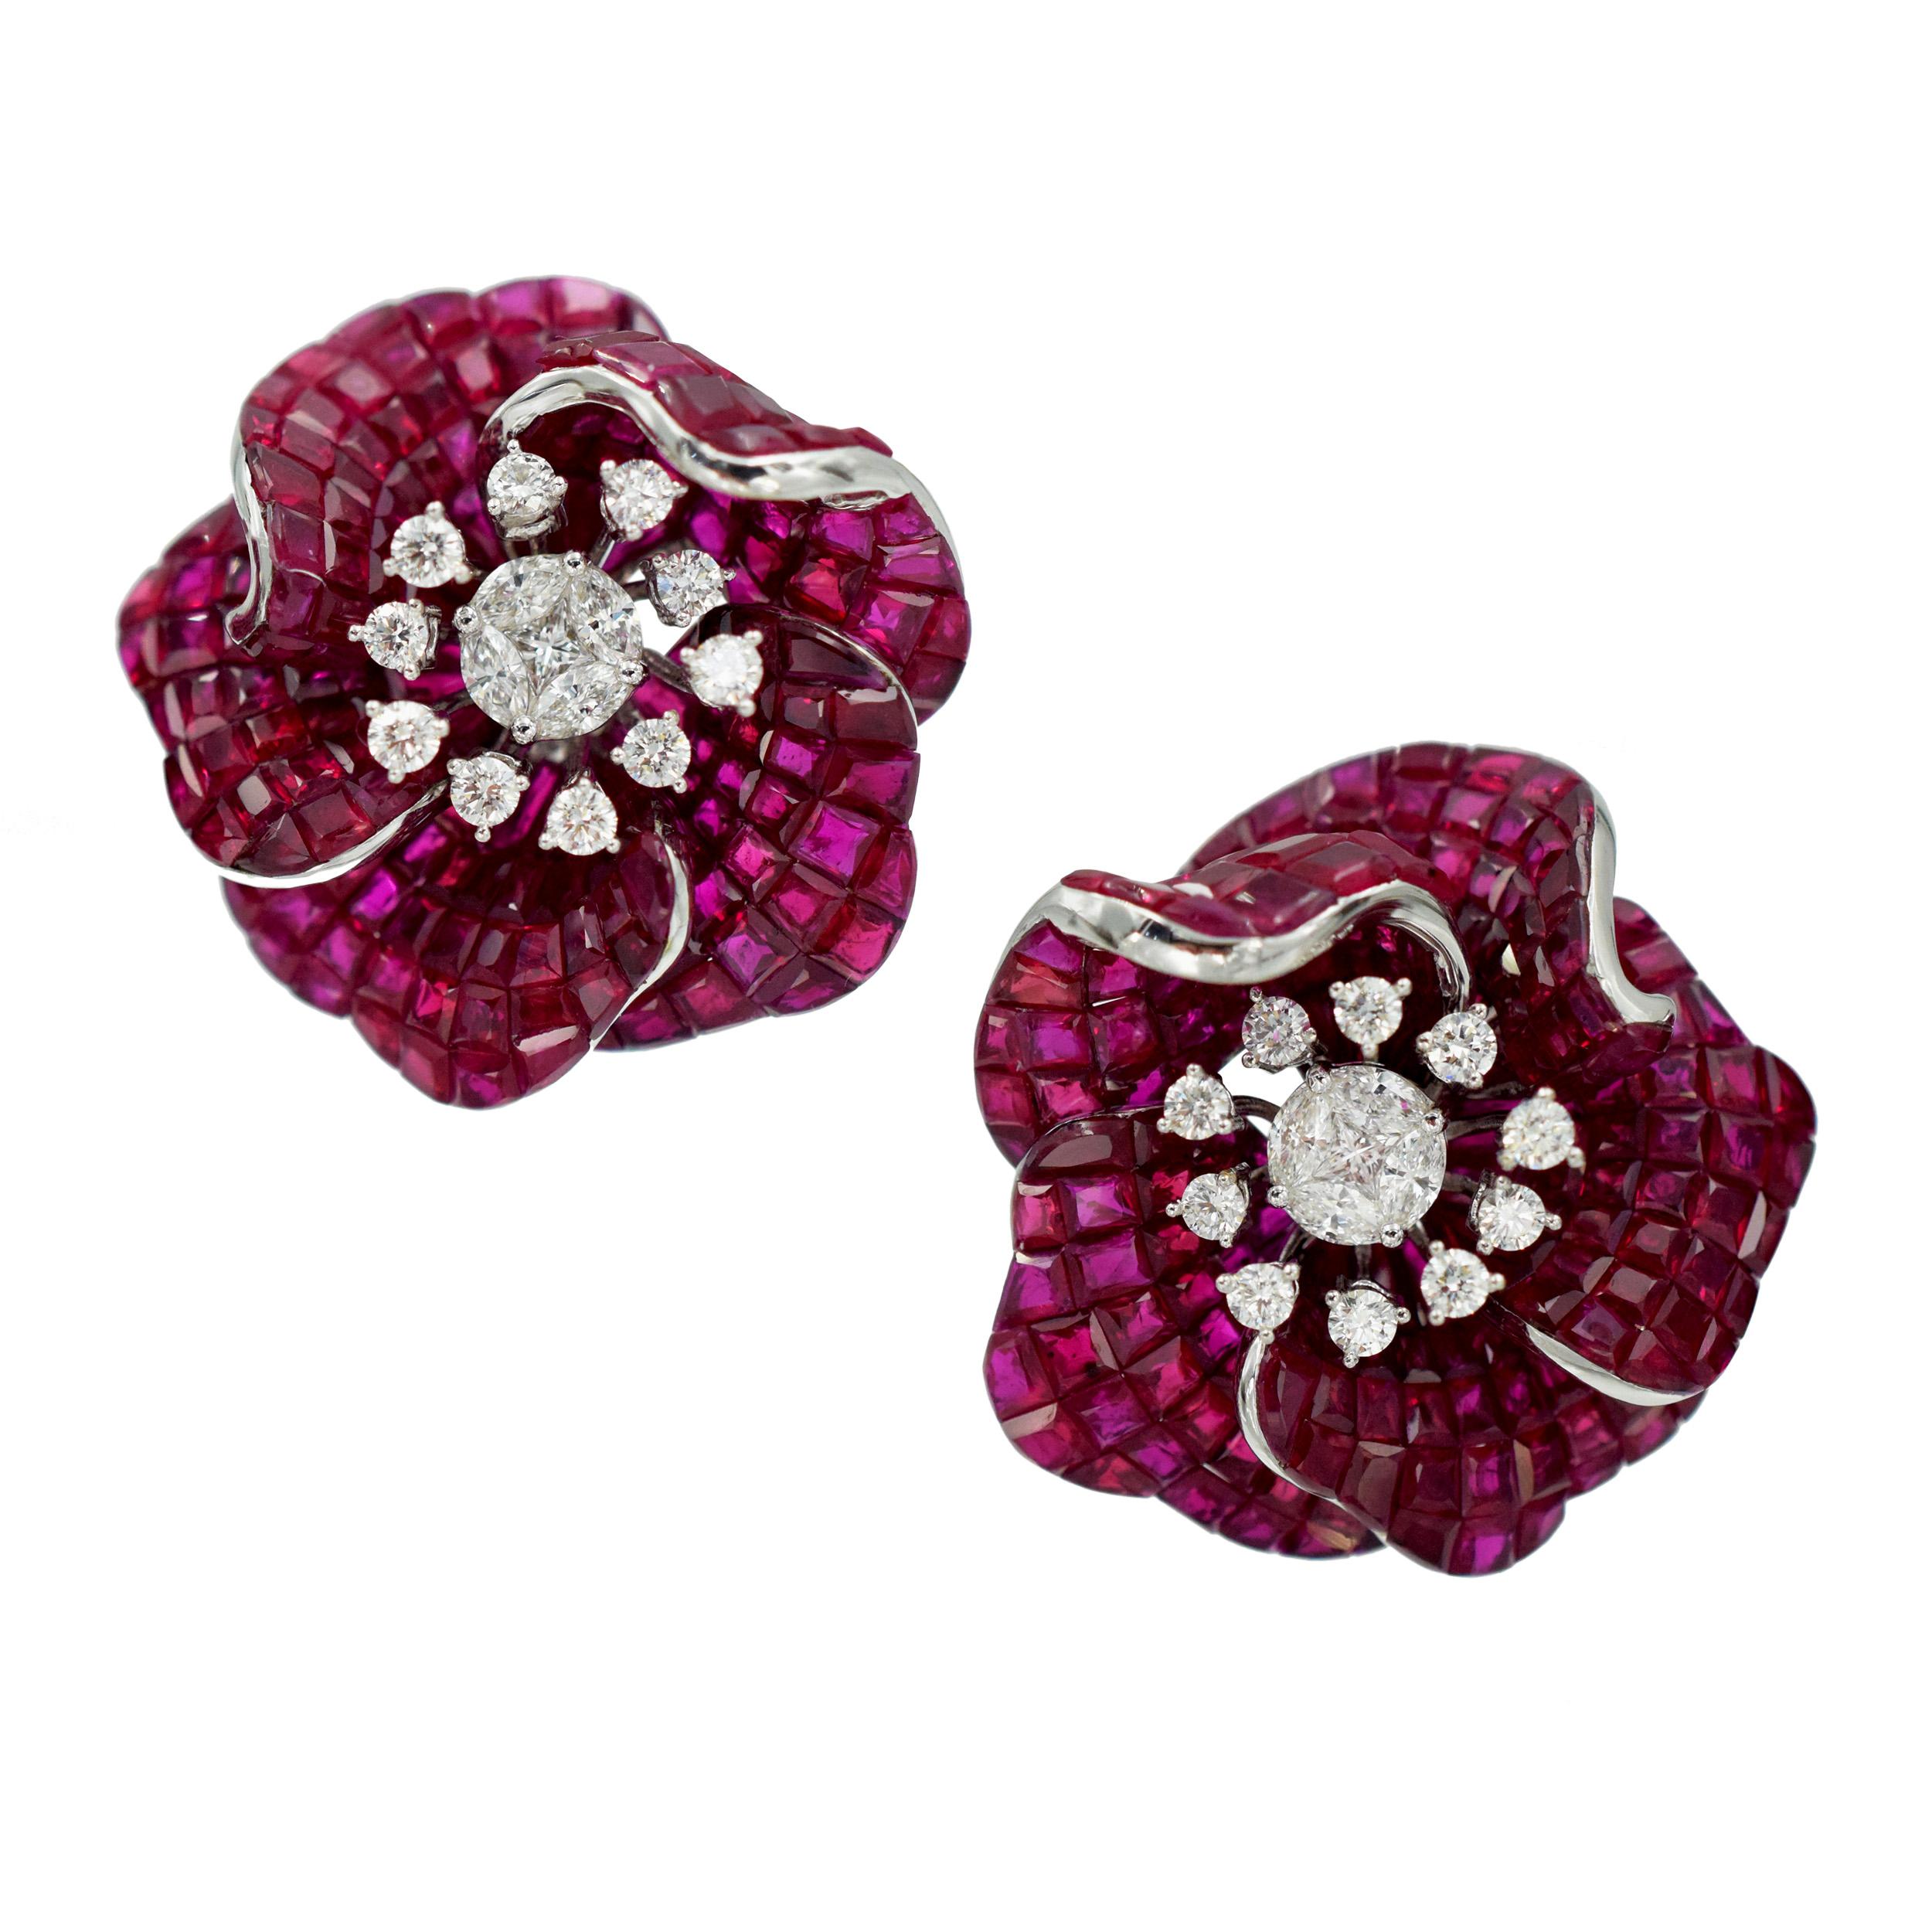 Flower ruby and diamond earrings. Crafted in 18k white gold. Each flower consists of five petals,
each invisibly set with square cut rubies with total weight of 64.50ct. Each center set with one cushion cut and four marquise cut diamonds, surrounded